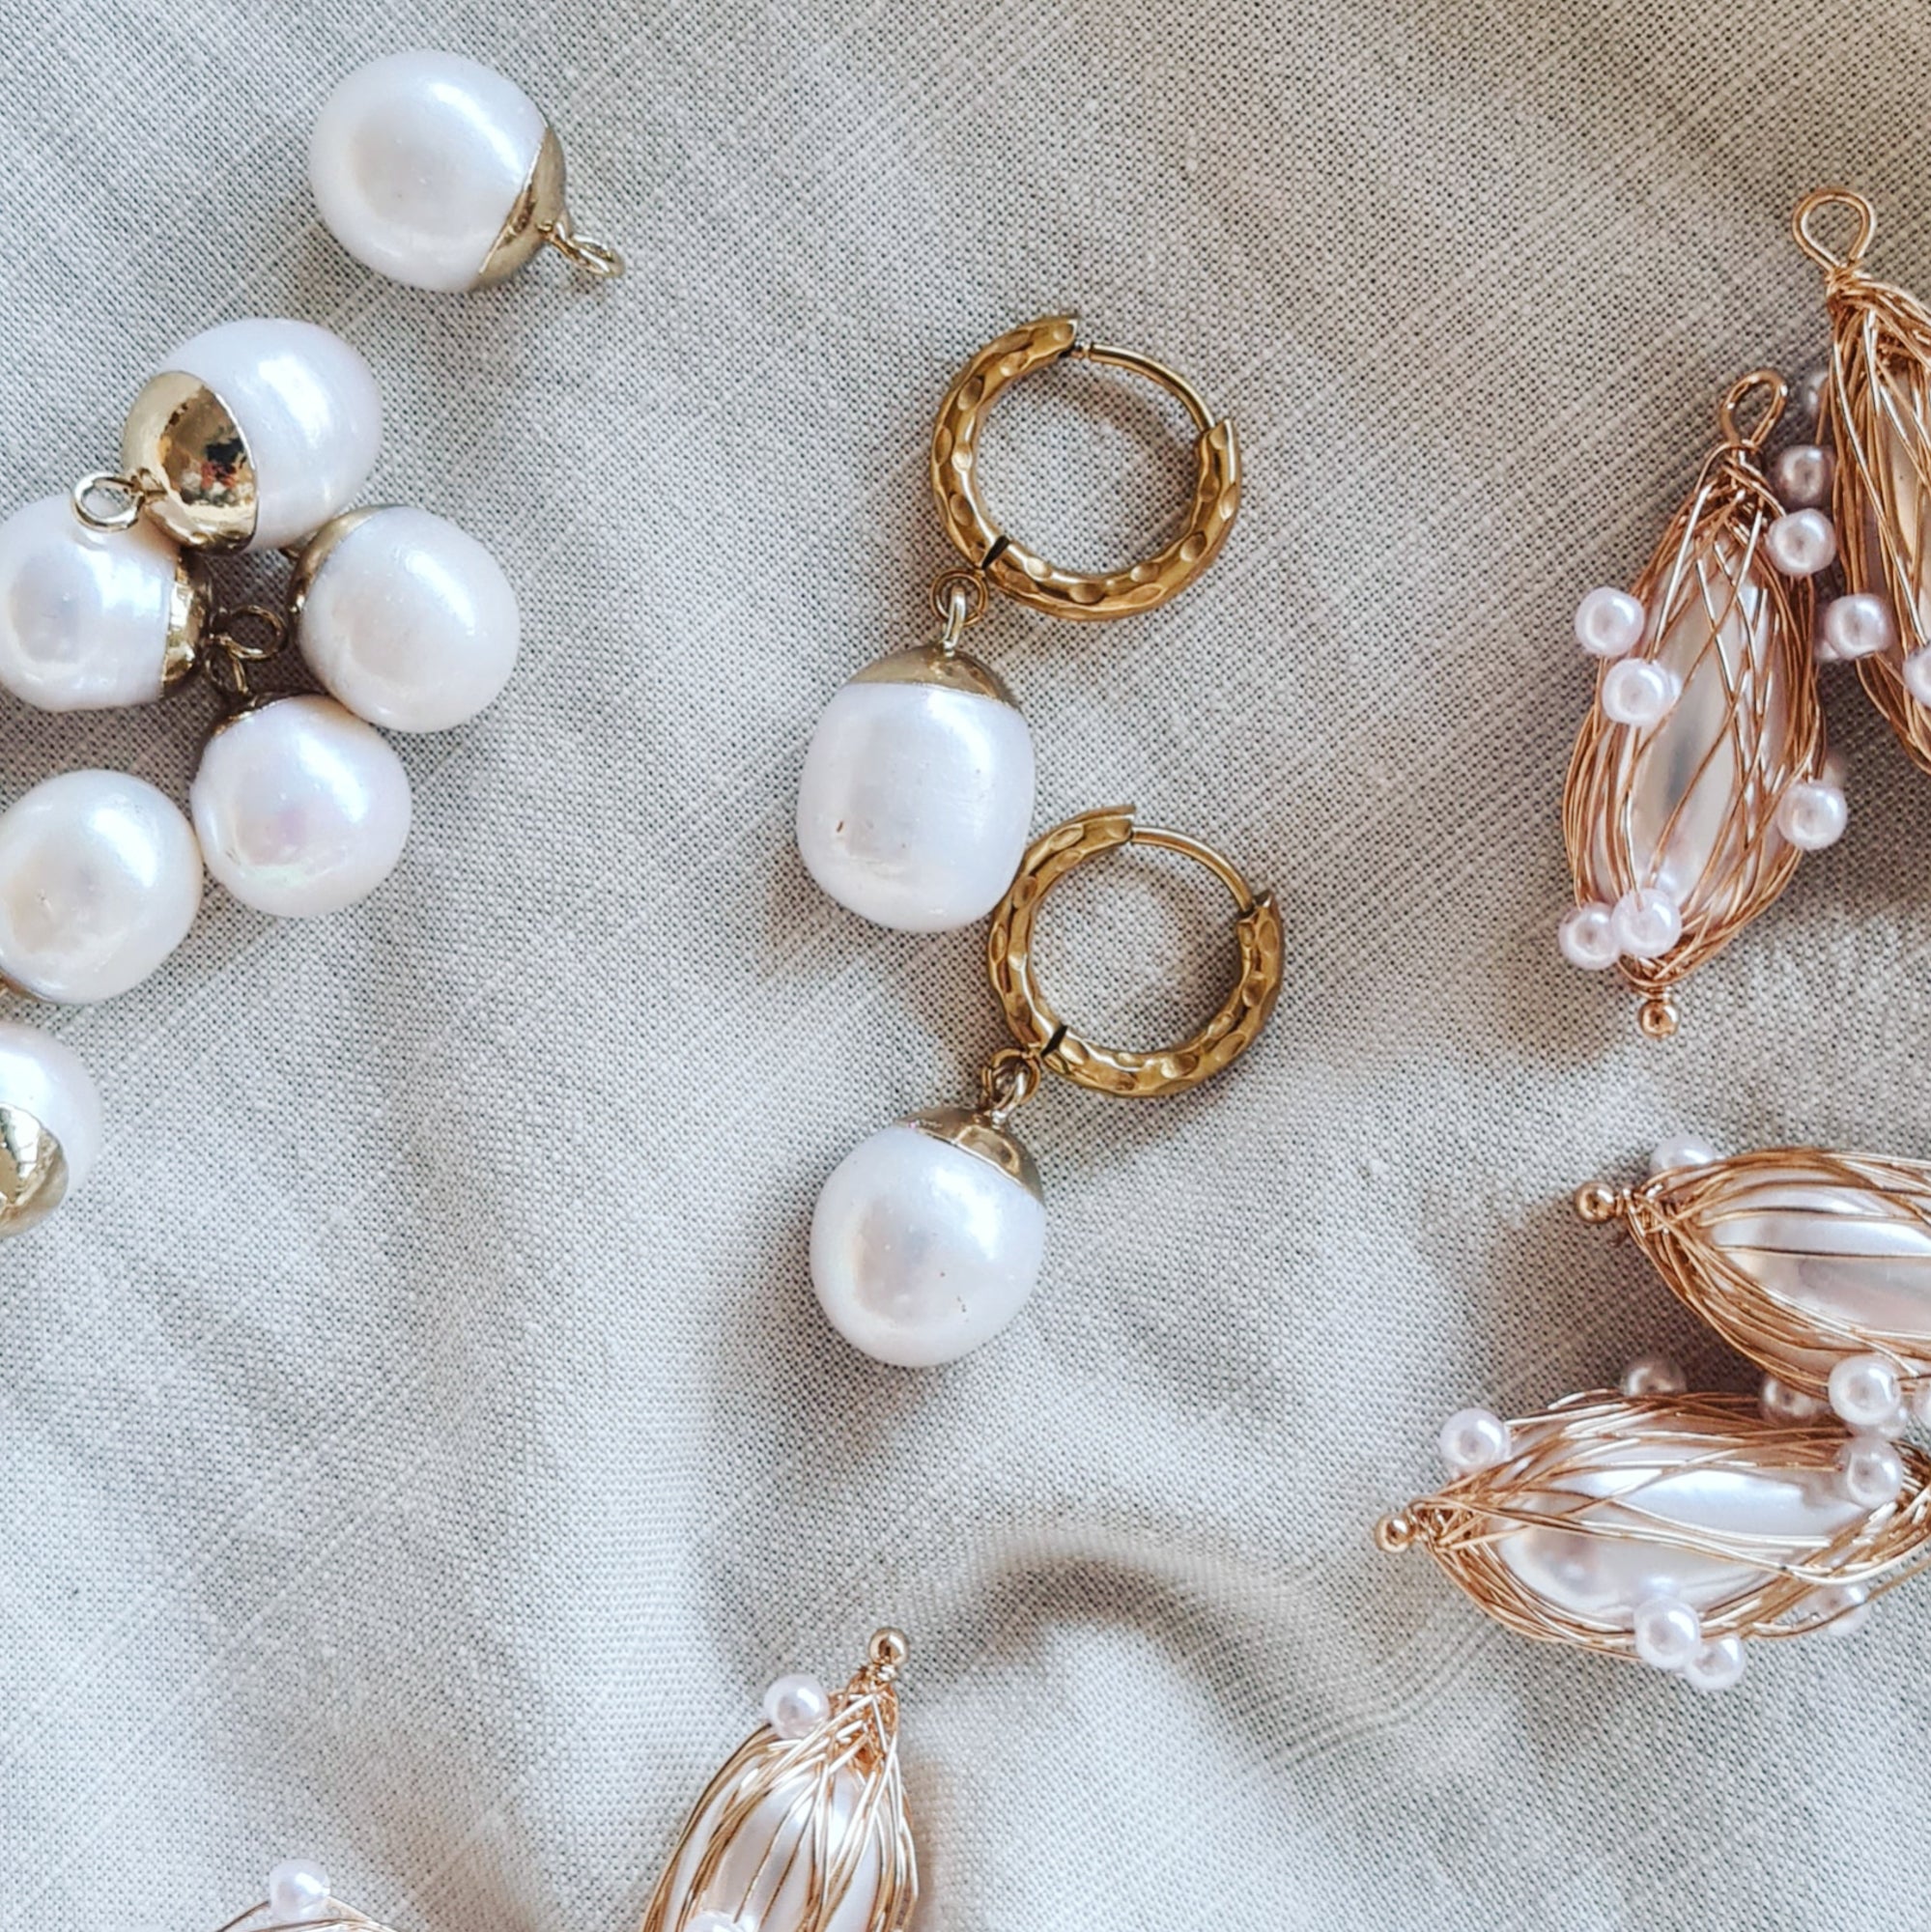 Festive Pearl Charms - 10 pieces